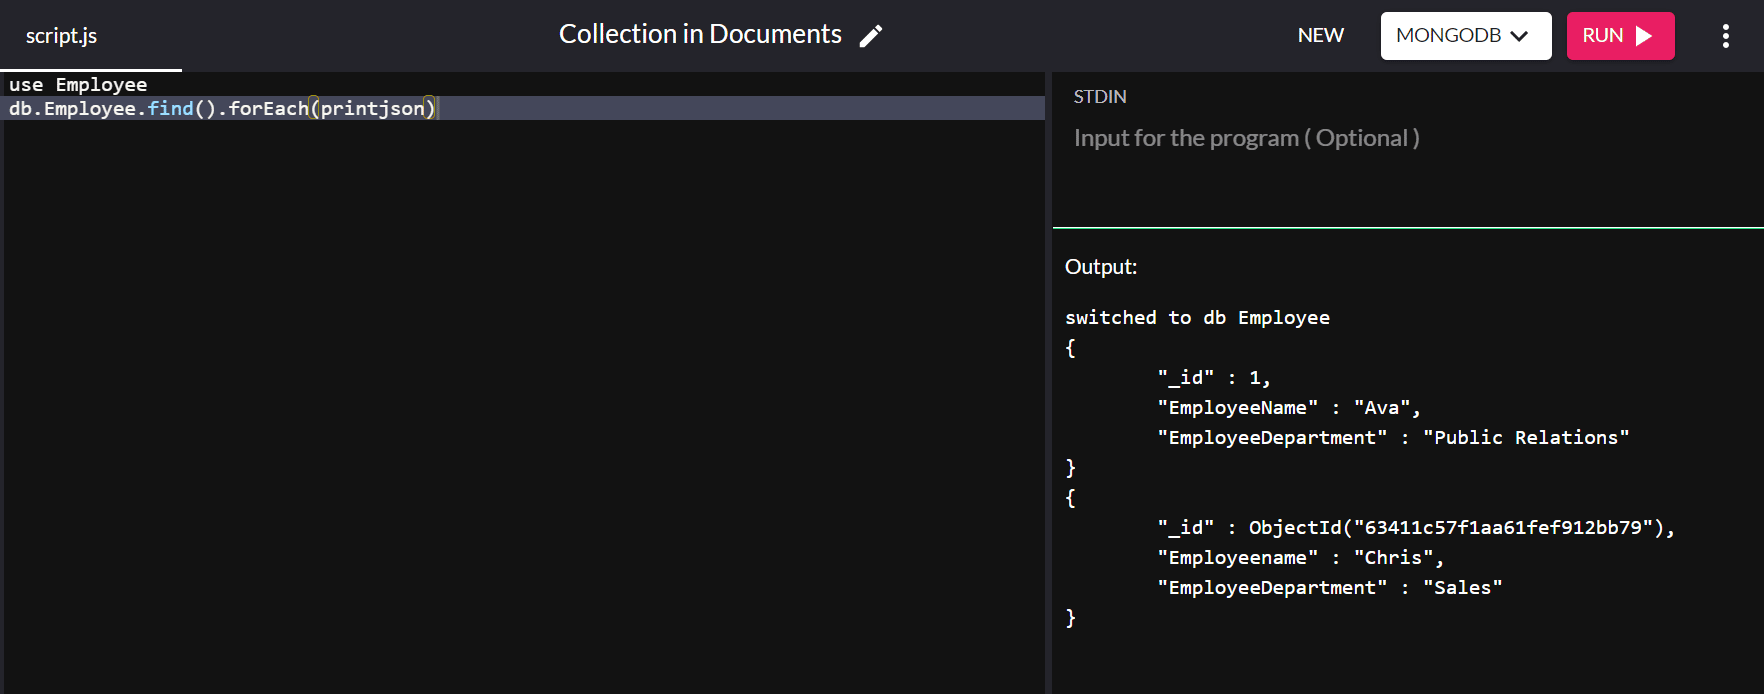 The output shows the documents in the Employee collection along with their primary key